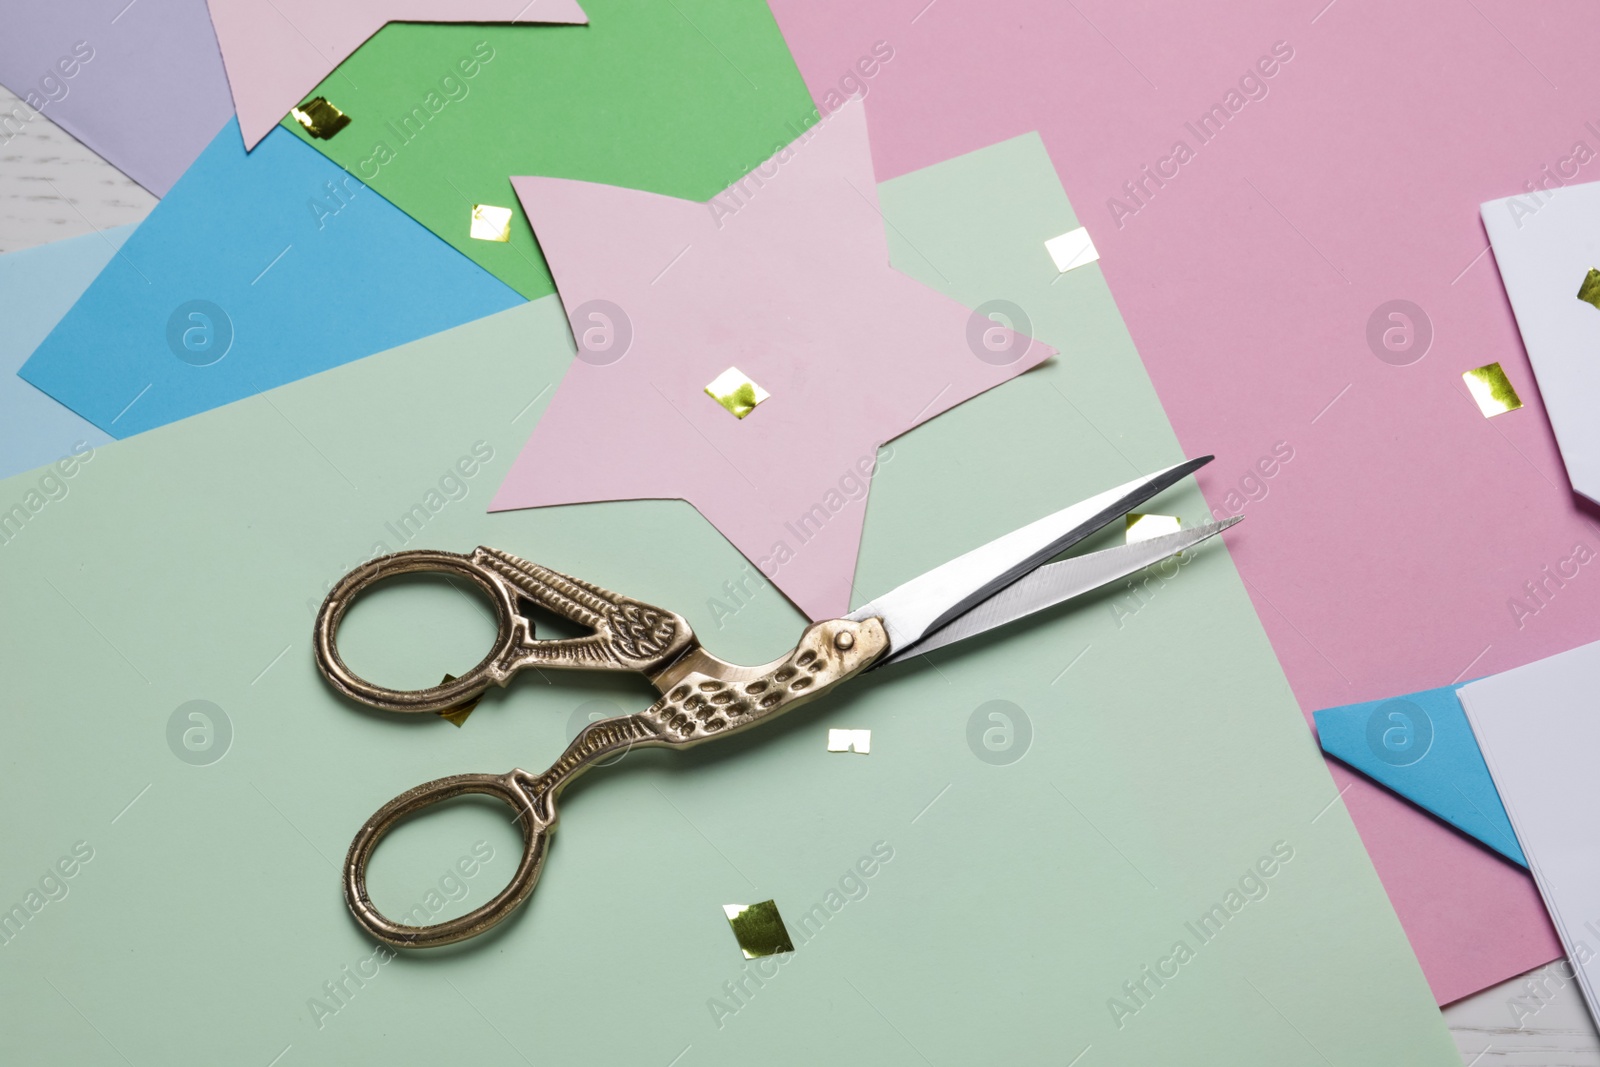 Photo of Pair of scissors with colorful paper sheets on white wooden table, above view